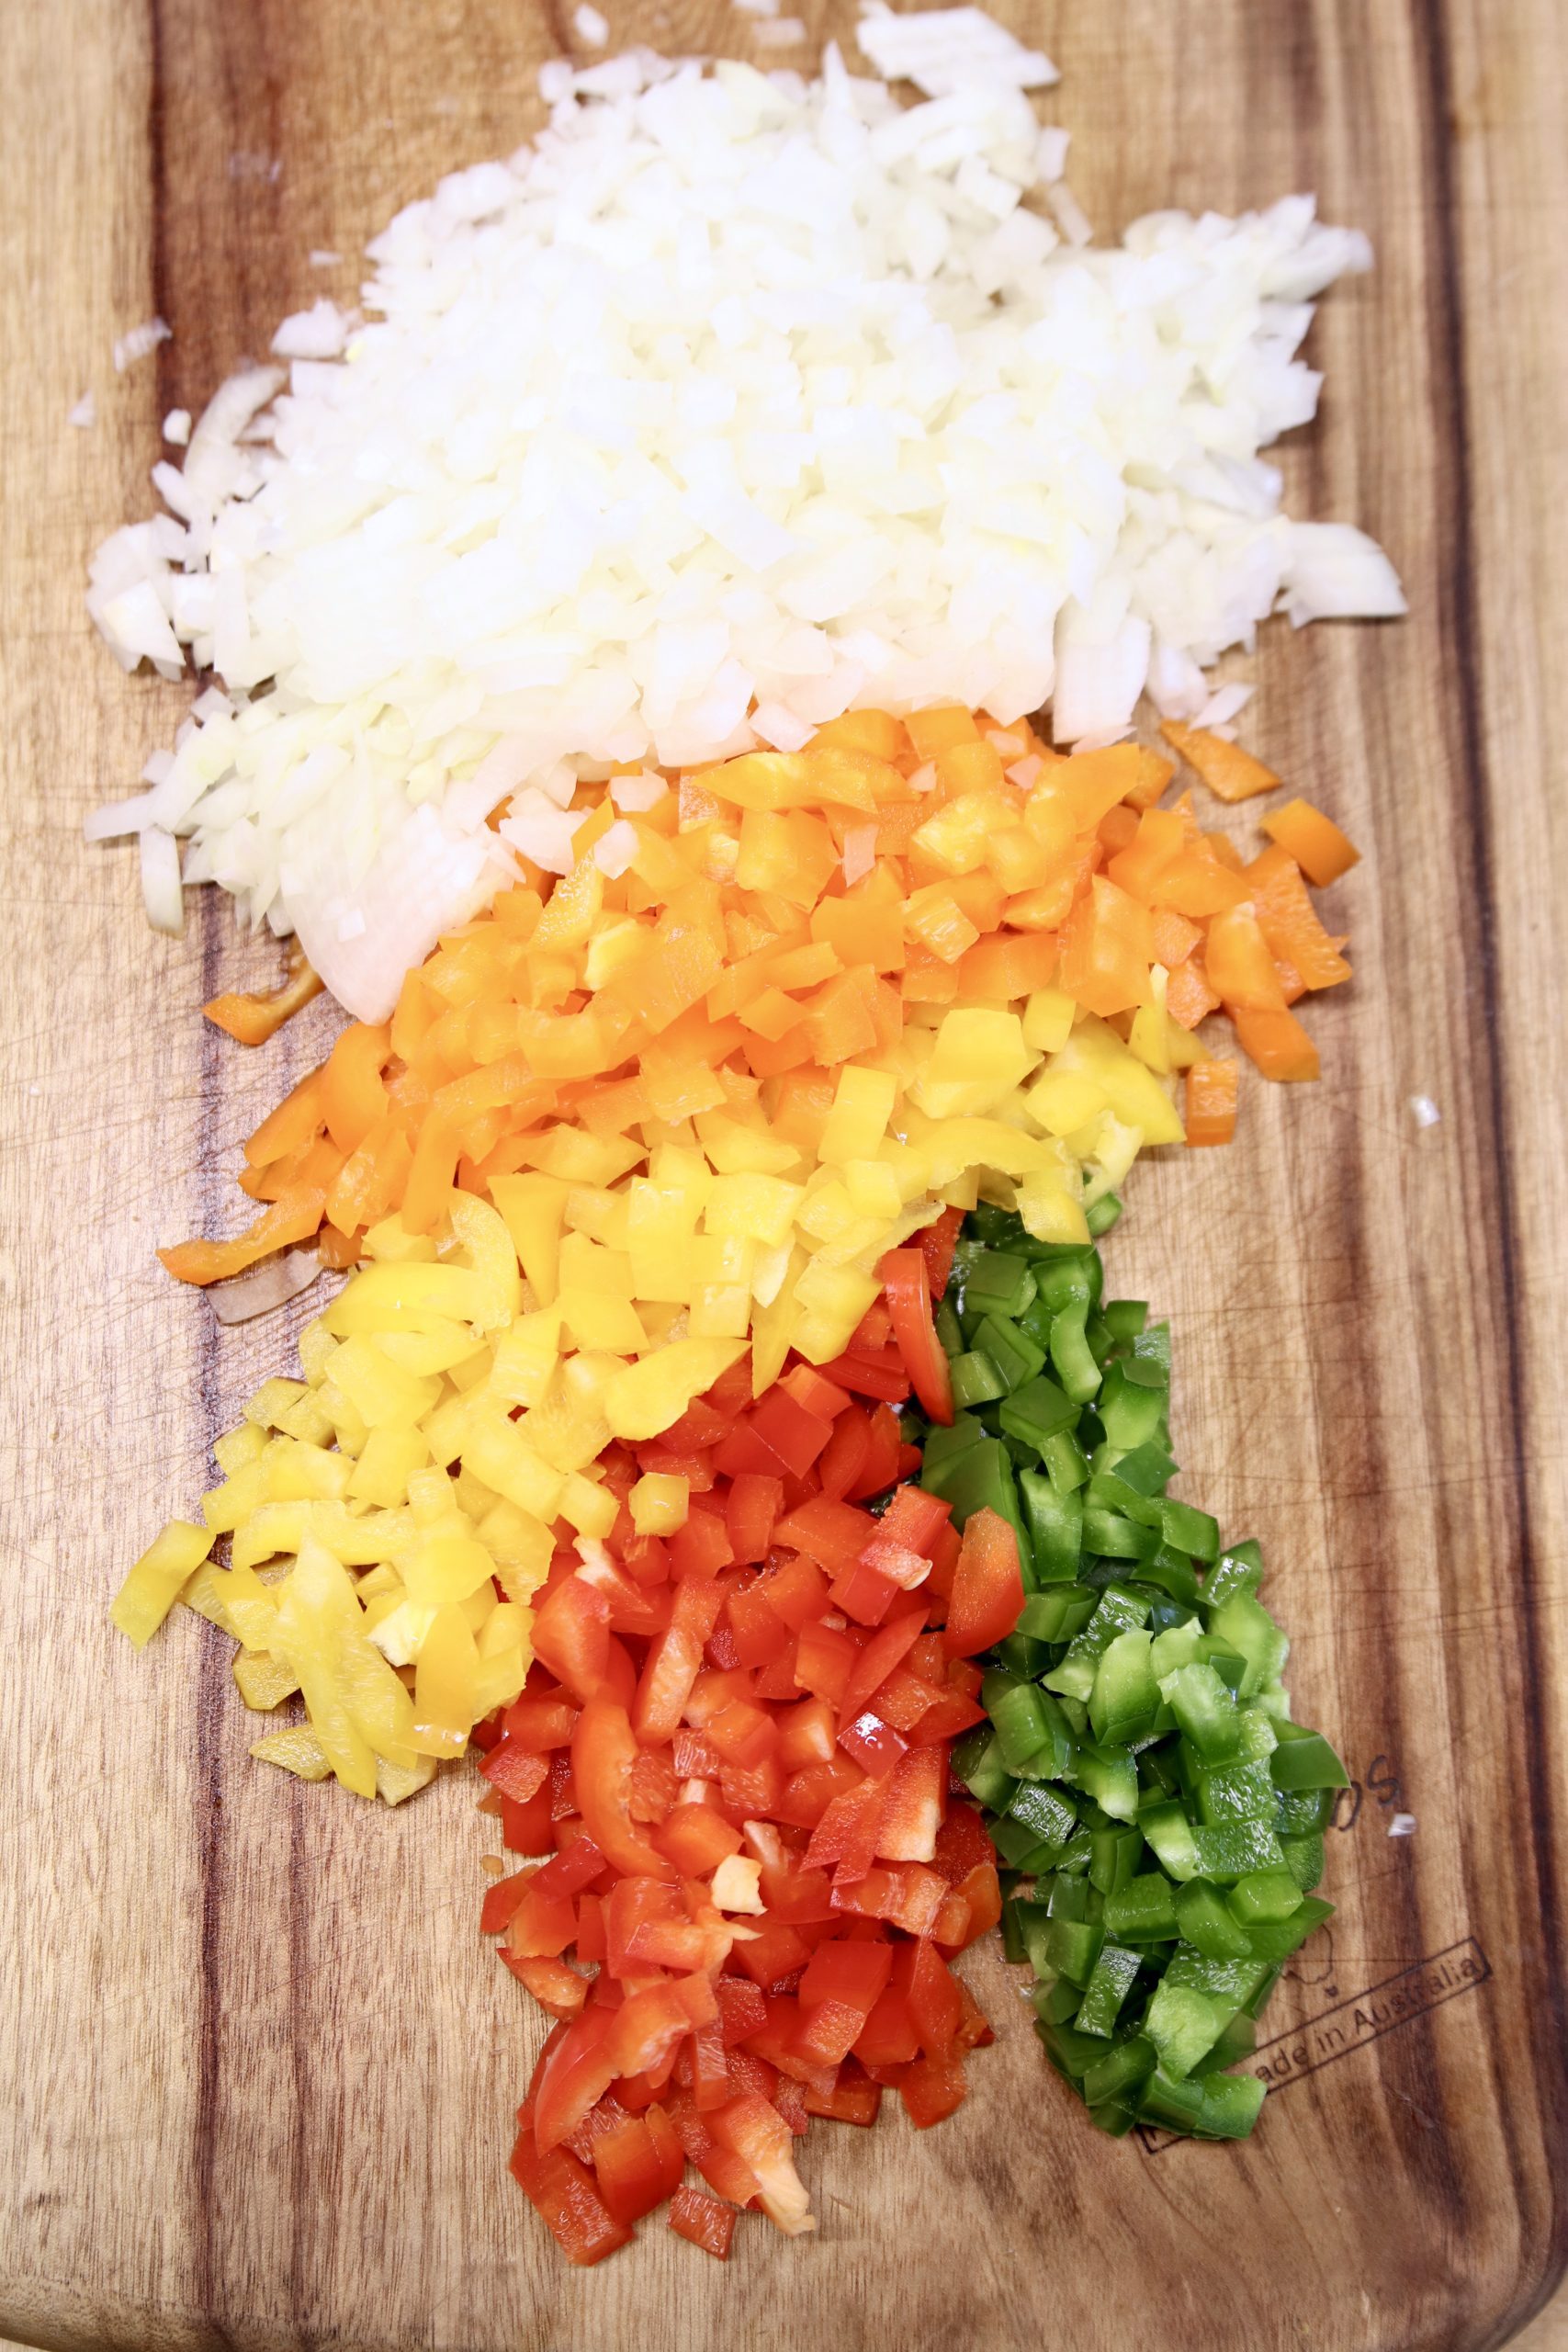 diced onions, orange, yellow, red and green bell peppers on a cutting board